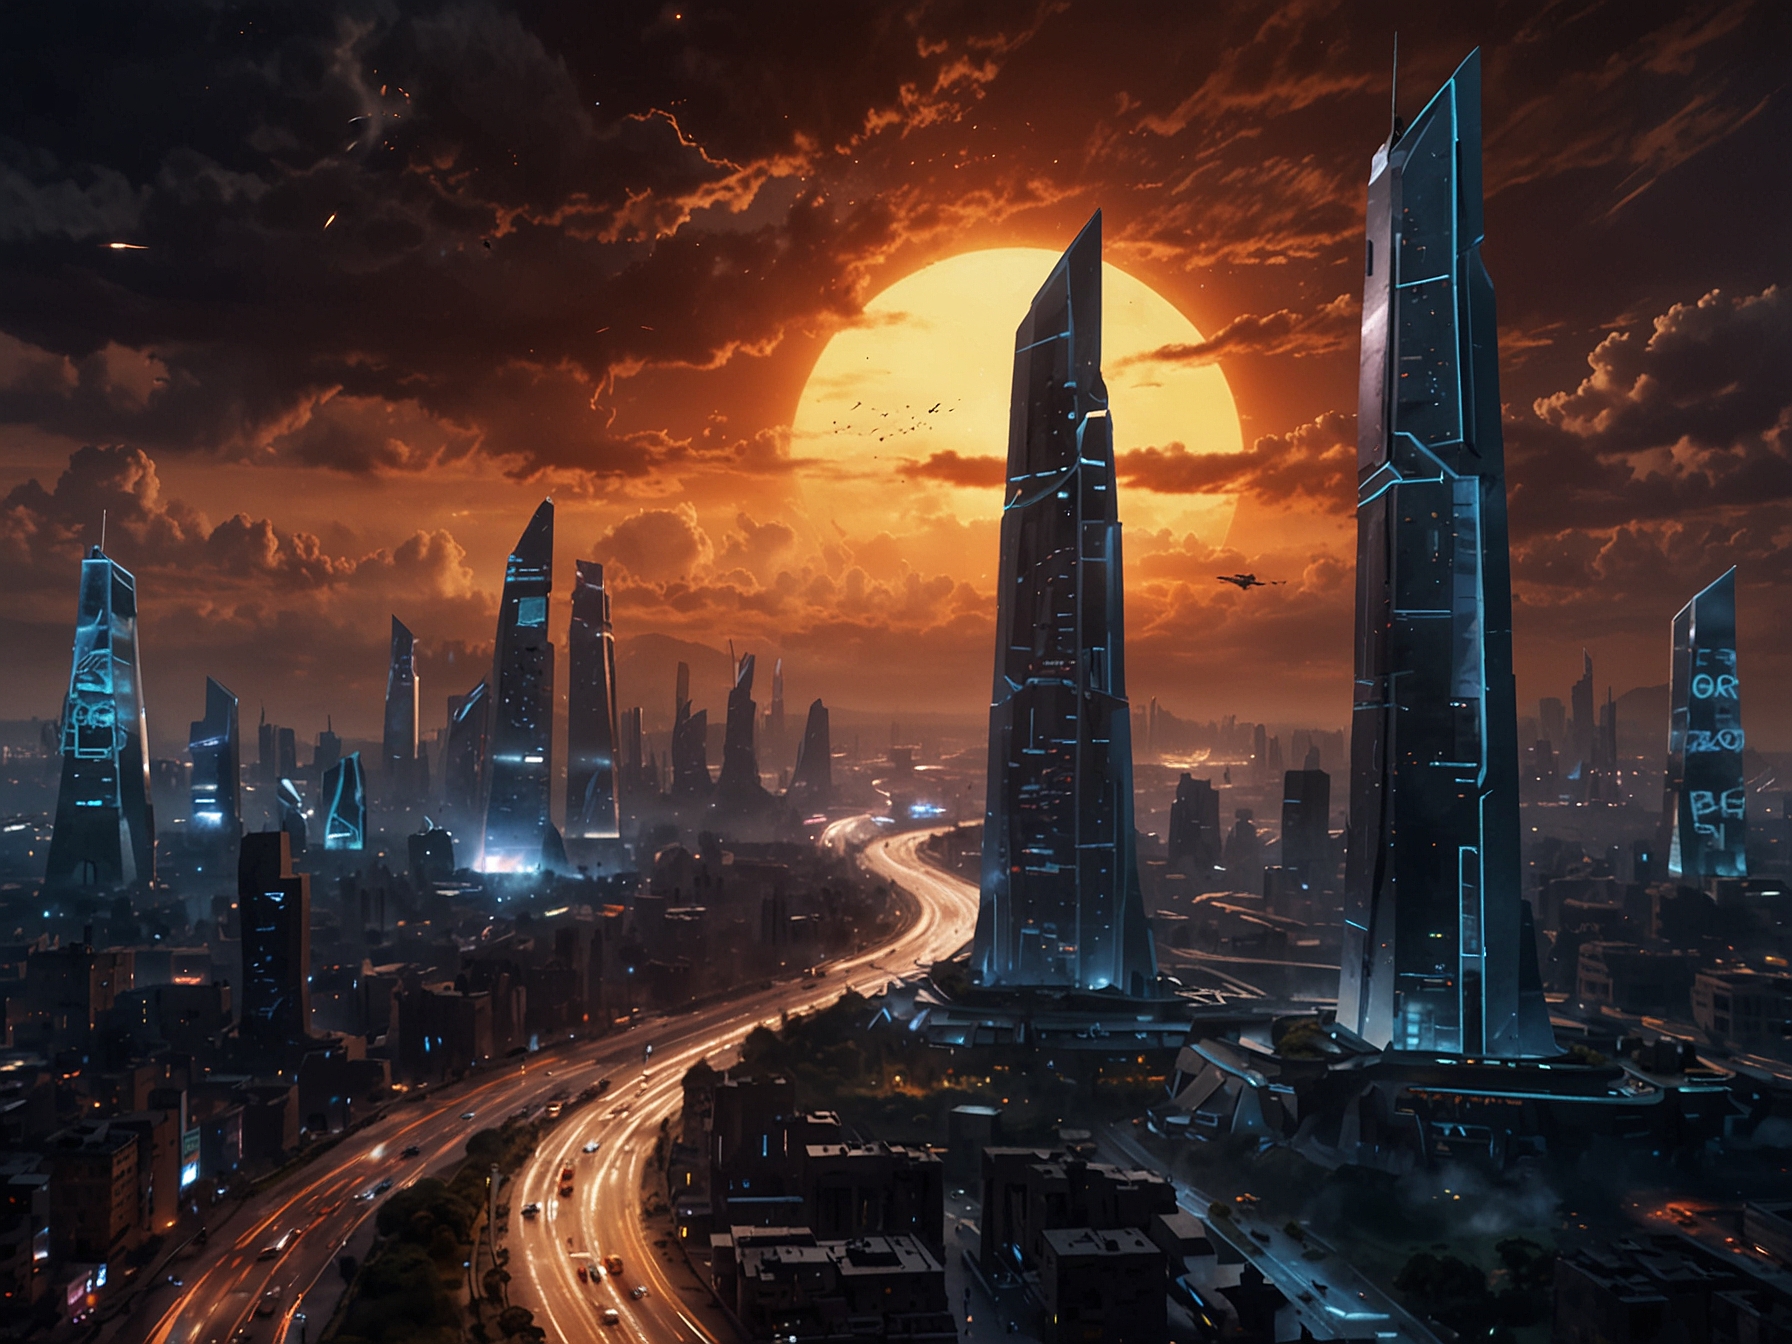 A visually striking scene from 'Kalki 2898 AD' showcases the future world it depicts, with futuristic cityscapes, advanced technology, and engaging action sequences reflecting the movie's high production value.